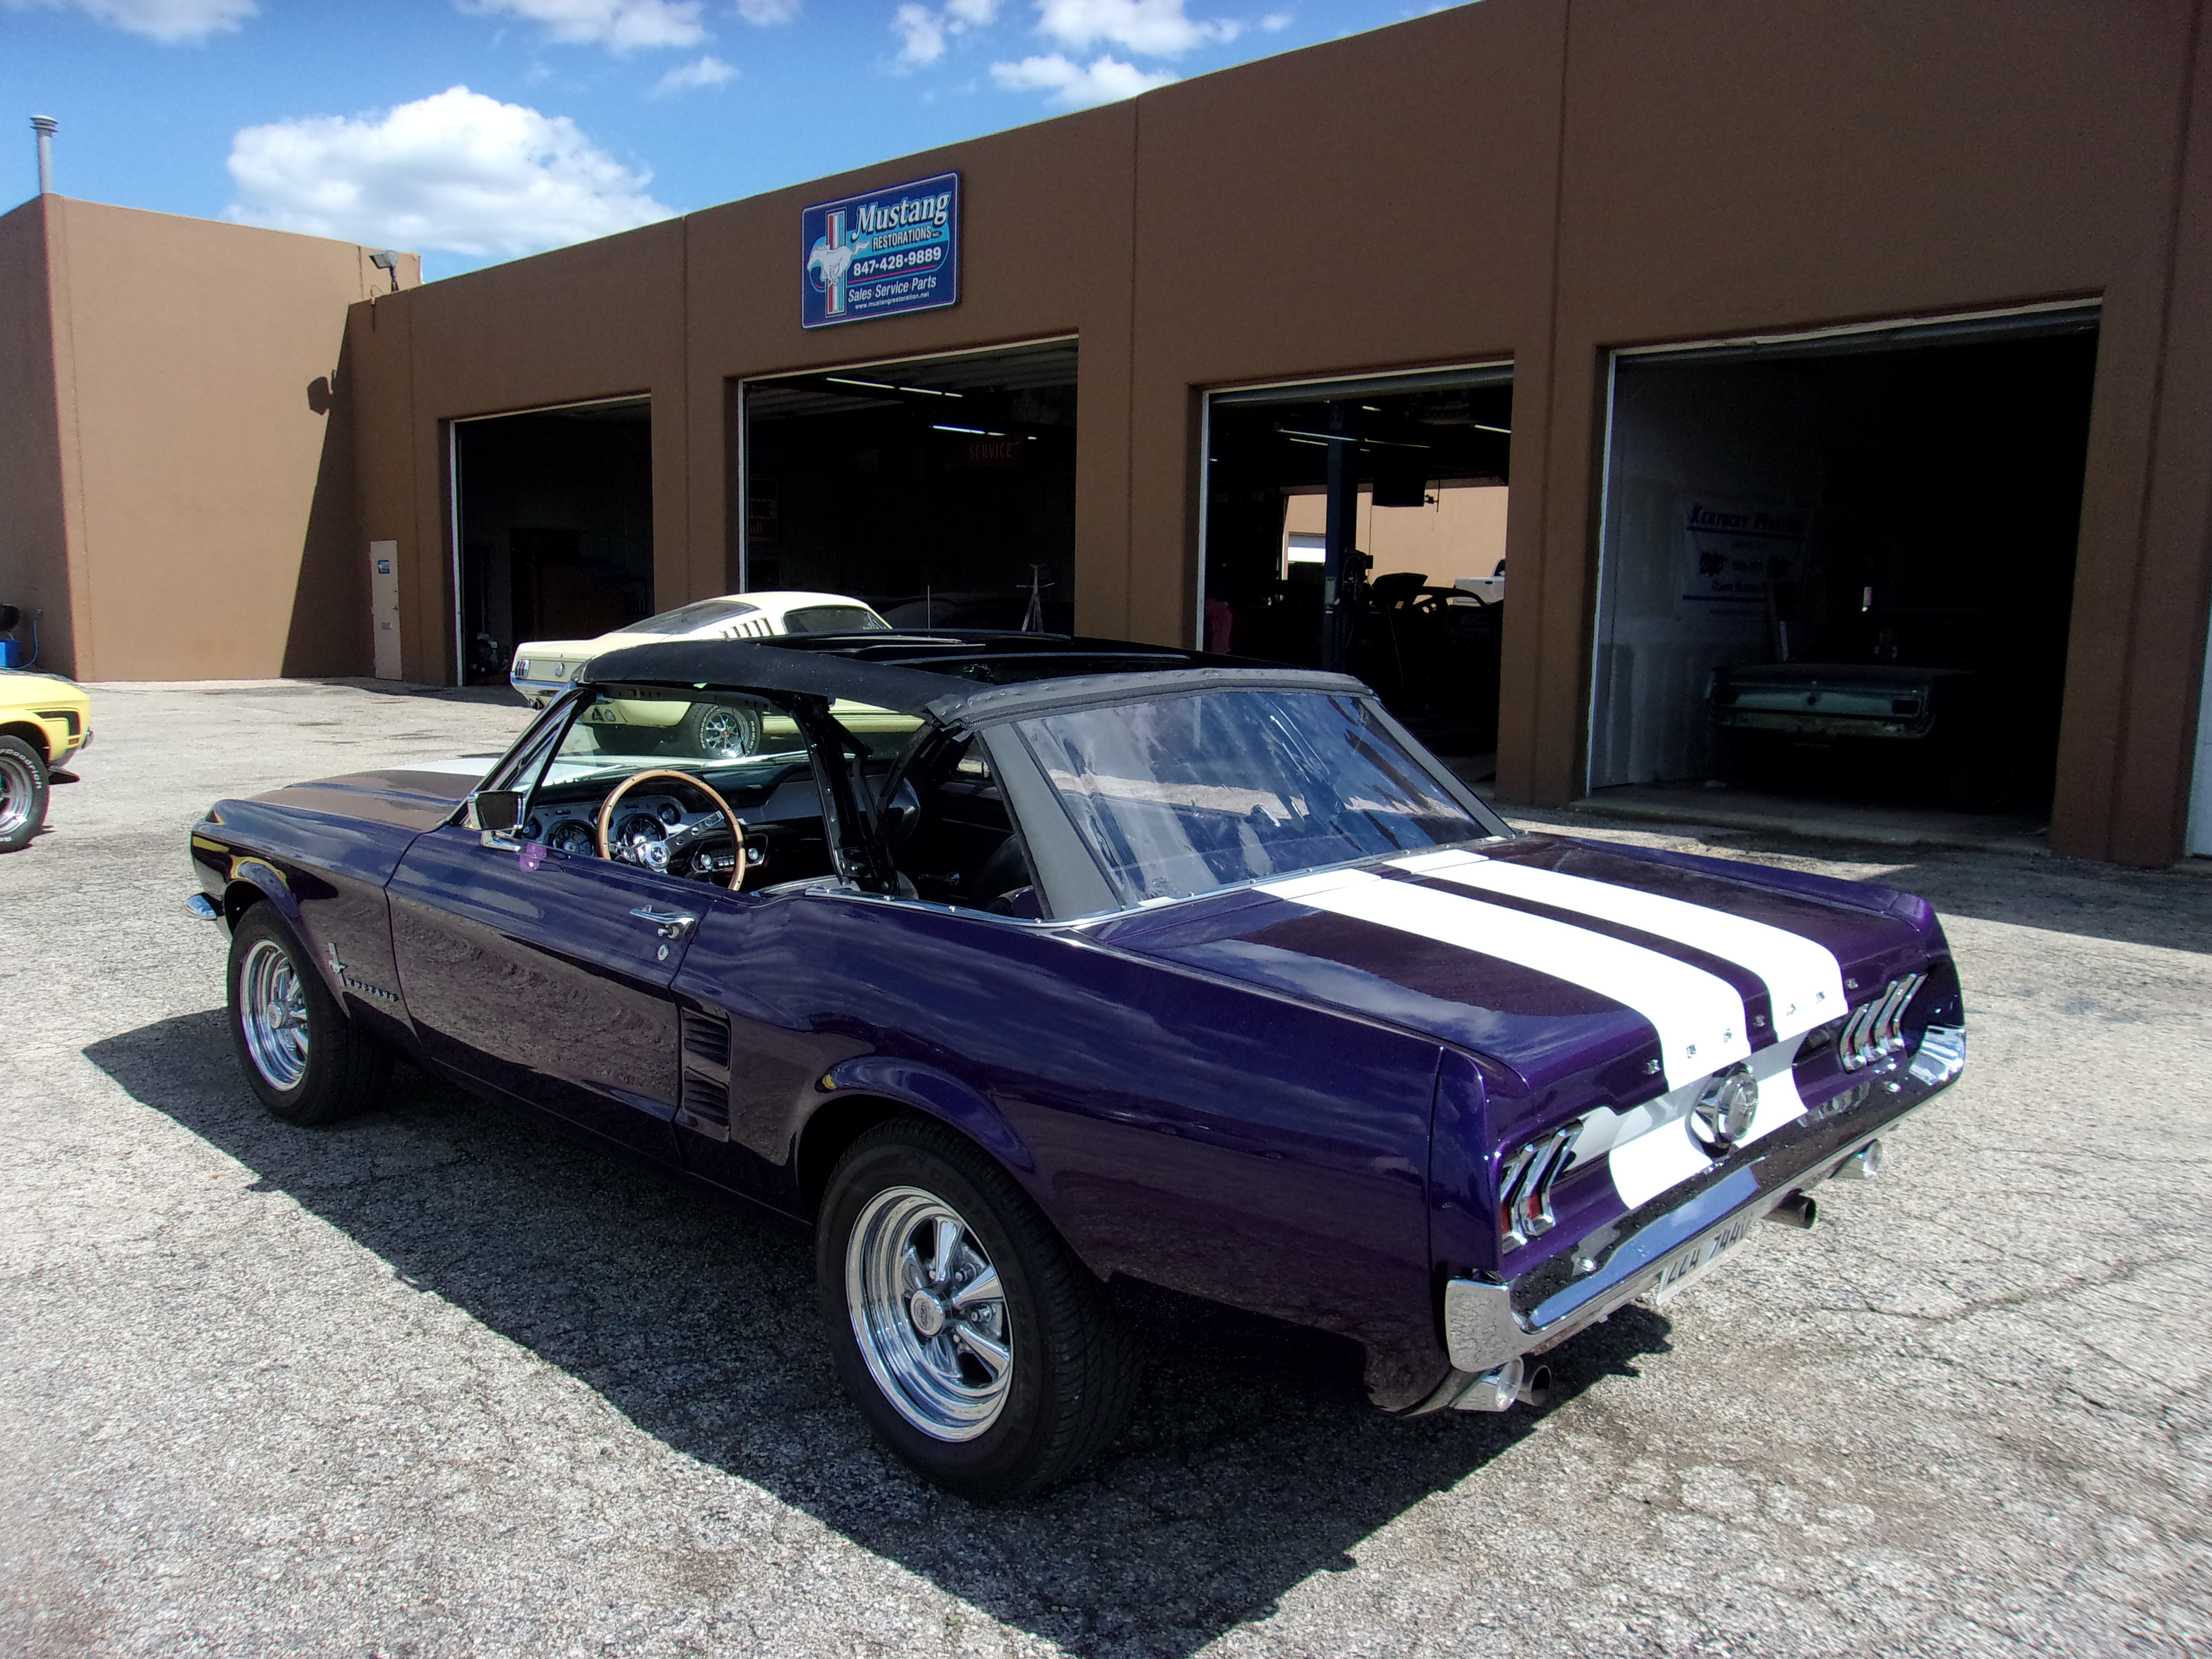 Vintage Ford Mustang Convertible Tops — systems Mustang building systems repair, & & for rebuilding, paint, vintage rust fuels engine Restorations, body work, electrical transmission in Inc. restorations, rotisserie frame-off rebuilding, specialize